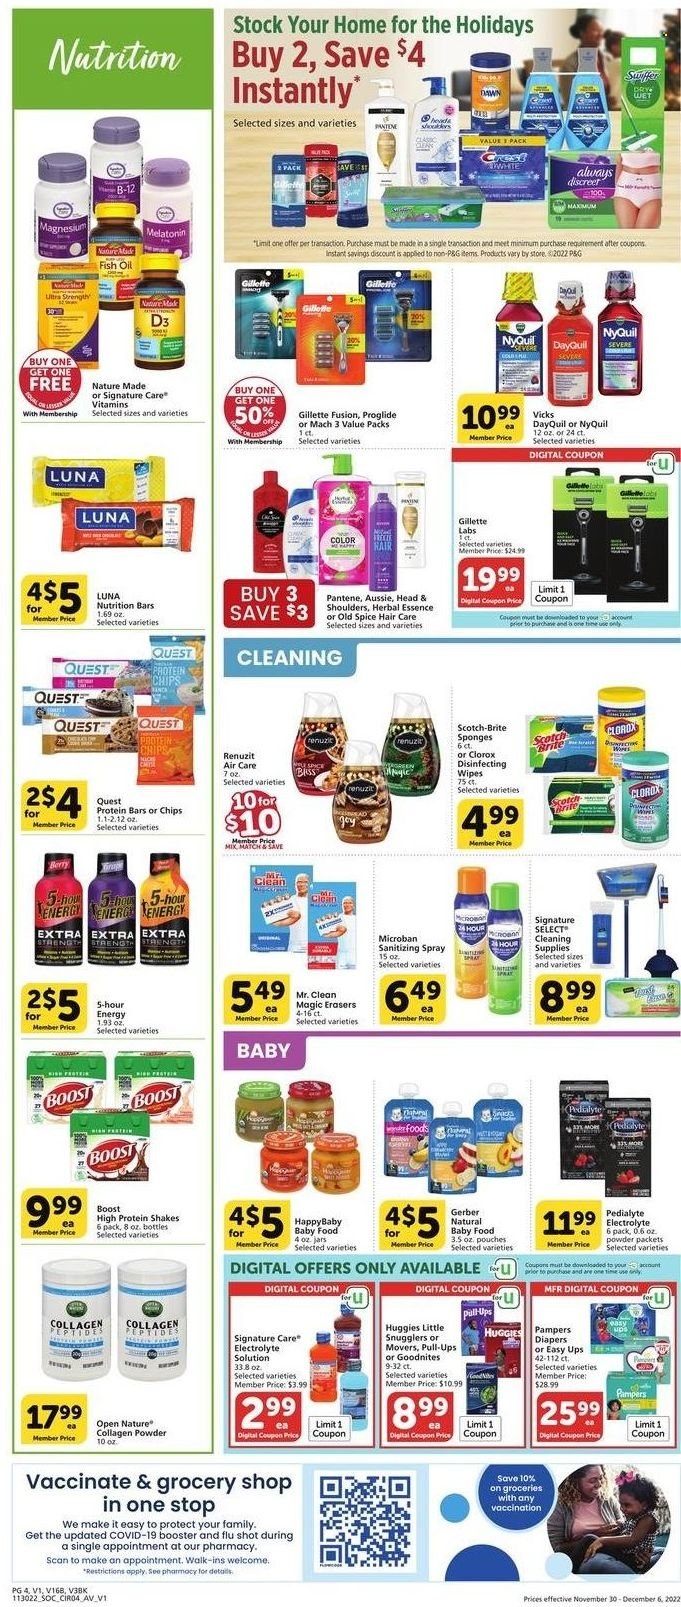 thumbnail - Vons Flyer - 11/30/2022 - 12/06/2022 - Sales products - protein drink, shake, snack, Gerber, chips, nutrition bar, protein bar, spice, oil, Boost, wipes, Huggies, Pampers, nappies, Clorox, Swiffer, Old Spice, Crest, Always Discreet, Aussie, Head & Shoulders, Pantene, Gillette, Vicks, sponge, jar, Renuzit, DayQuil, fish oil, magnesium, Melatonin, Nature Made, NyQuil, vitamin D3. Page 4.